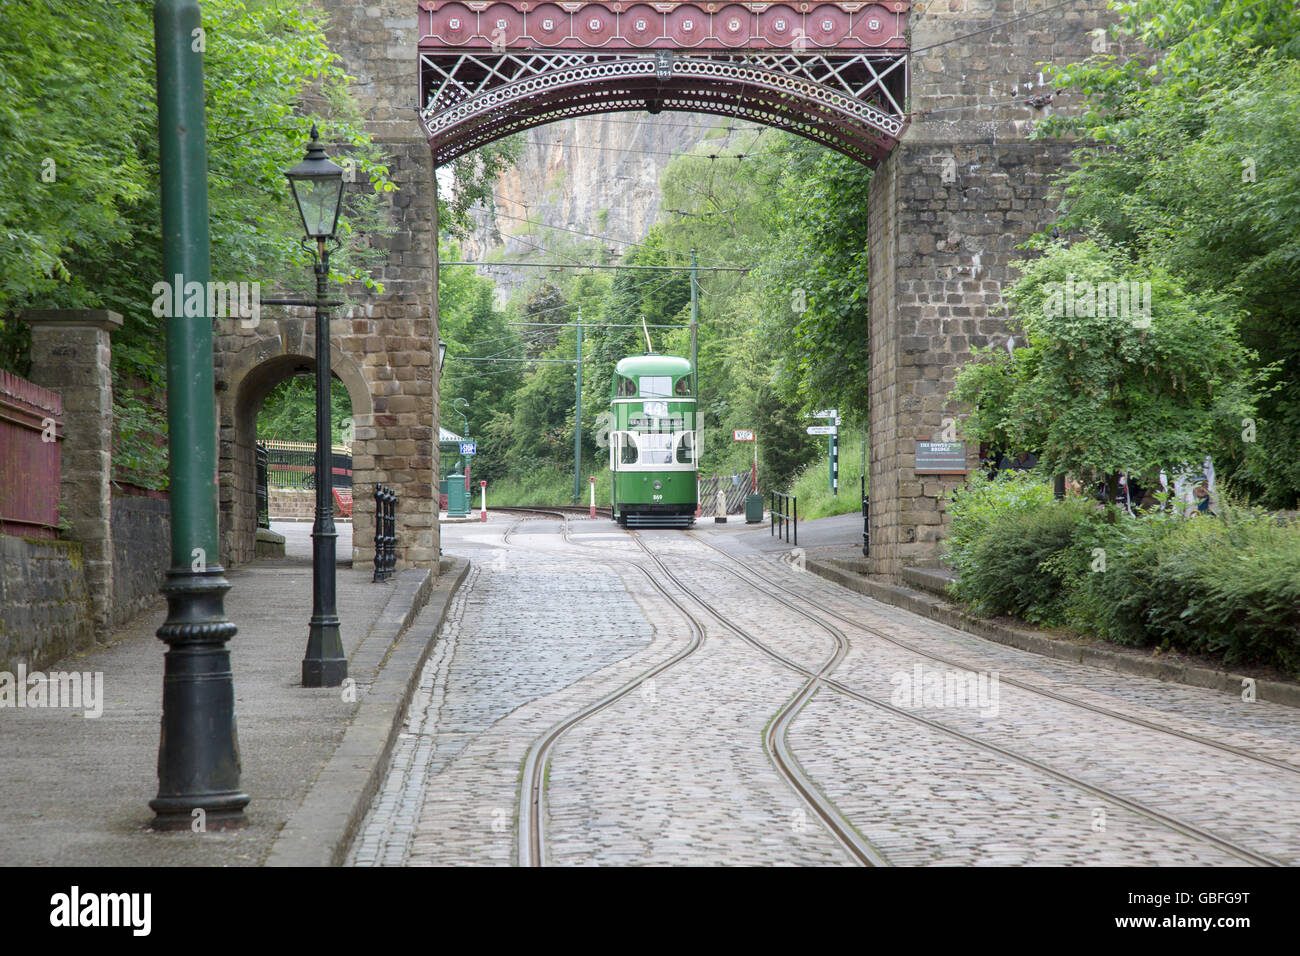 Liverpool Tram at National Tramway Museum and Village, Crich, Derbyshire, Peak District, England Stock Photo